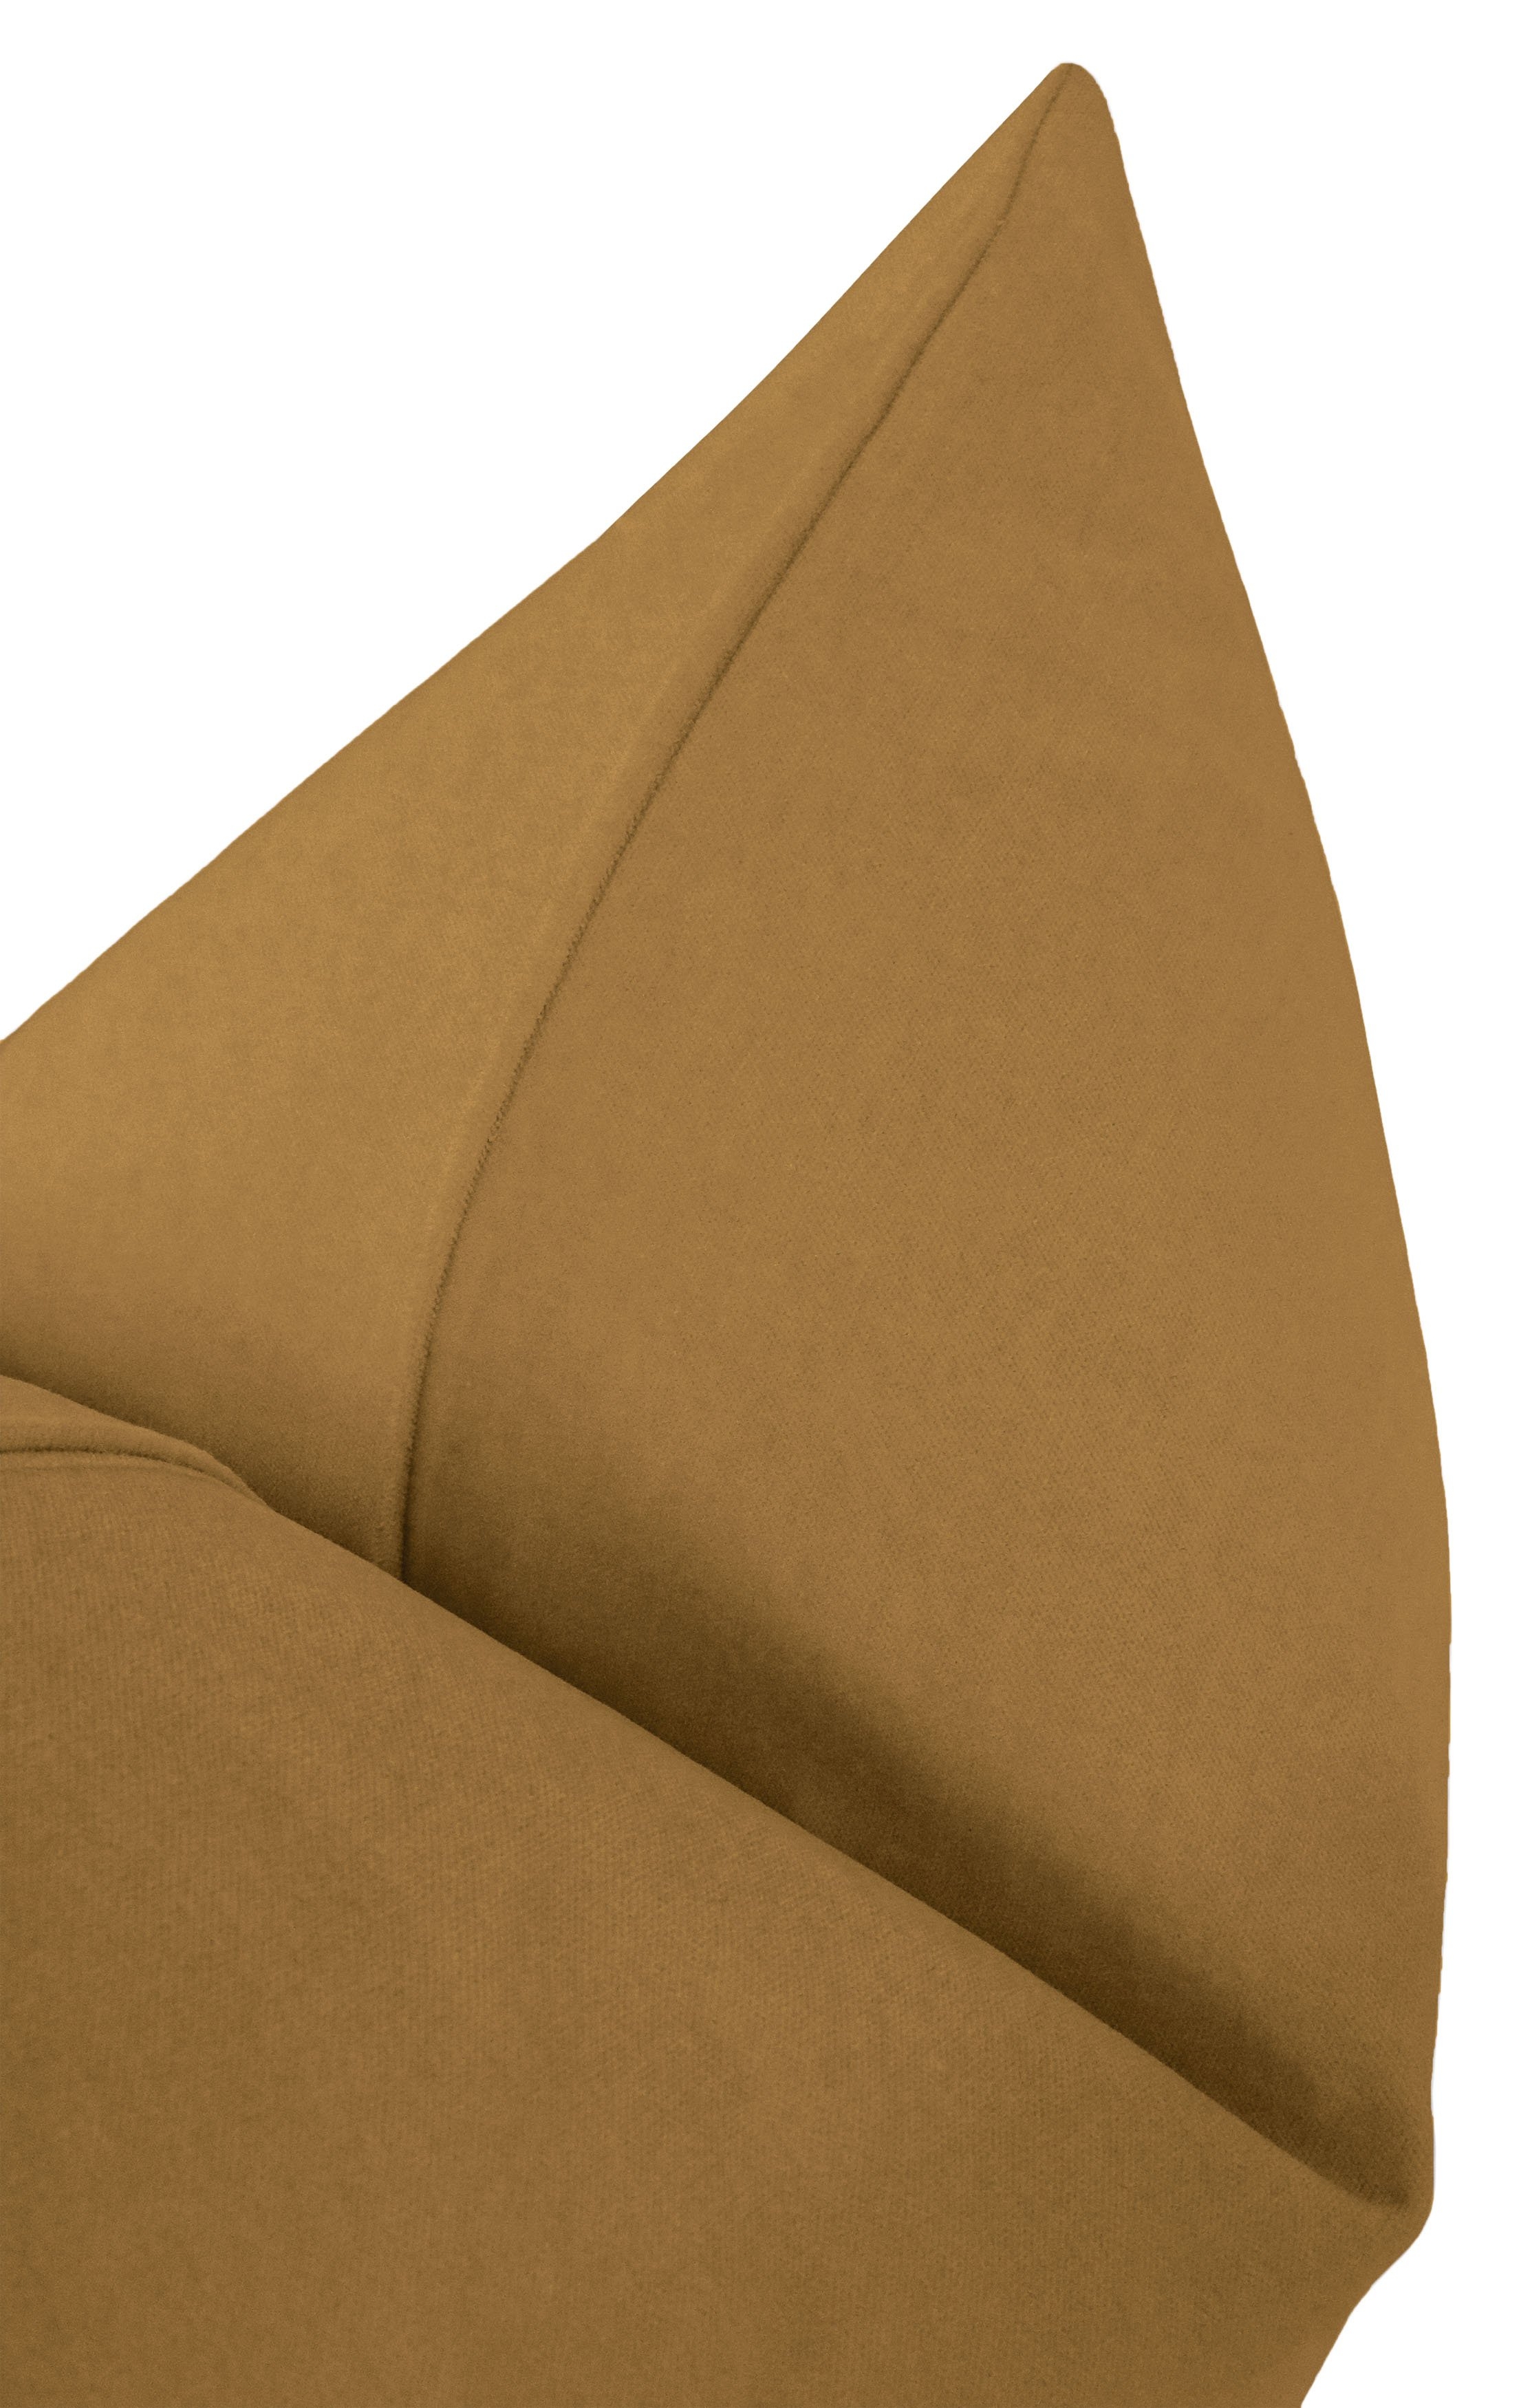 Classic Velvet Throw Pillow Cover, Sable, 18" x 18" - Image 2